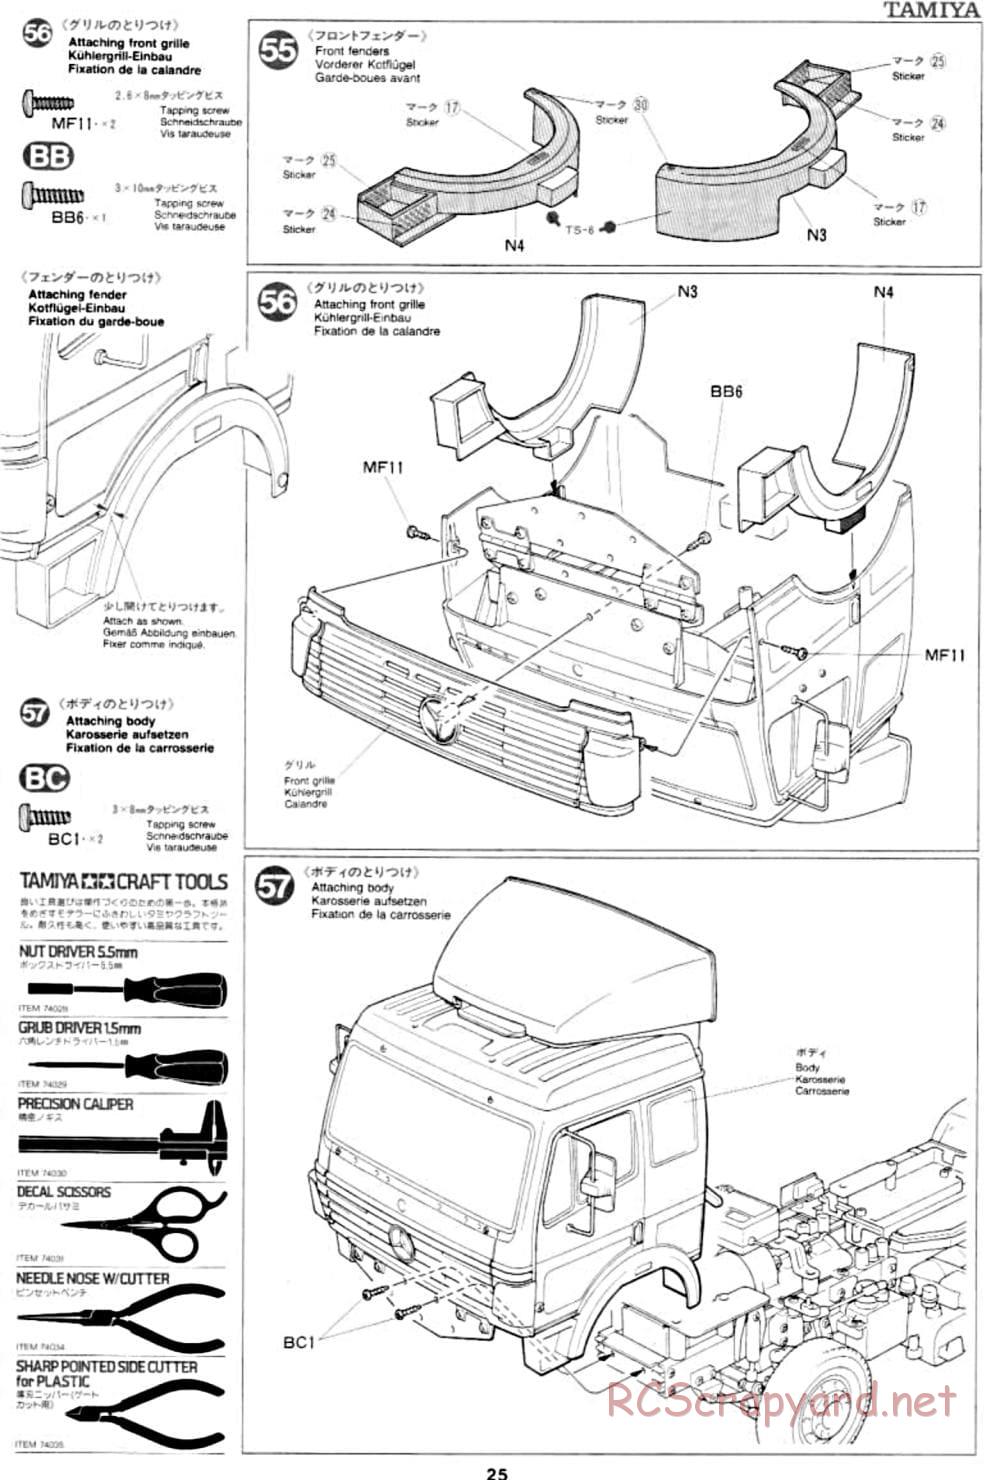 Tamiya - Mercedes-Benz 1850L Delivery Truck - Manual - Page 25